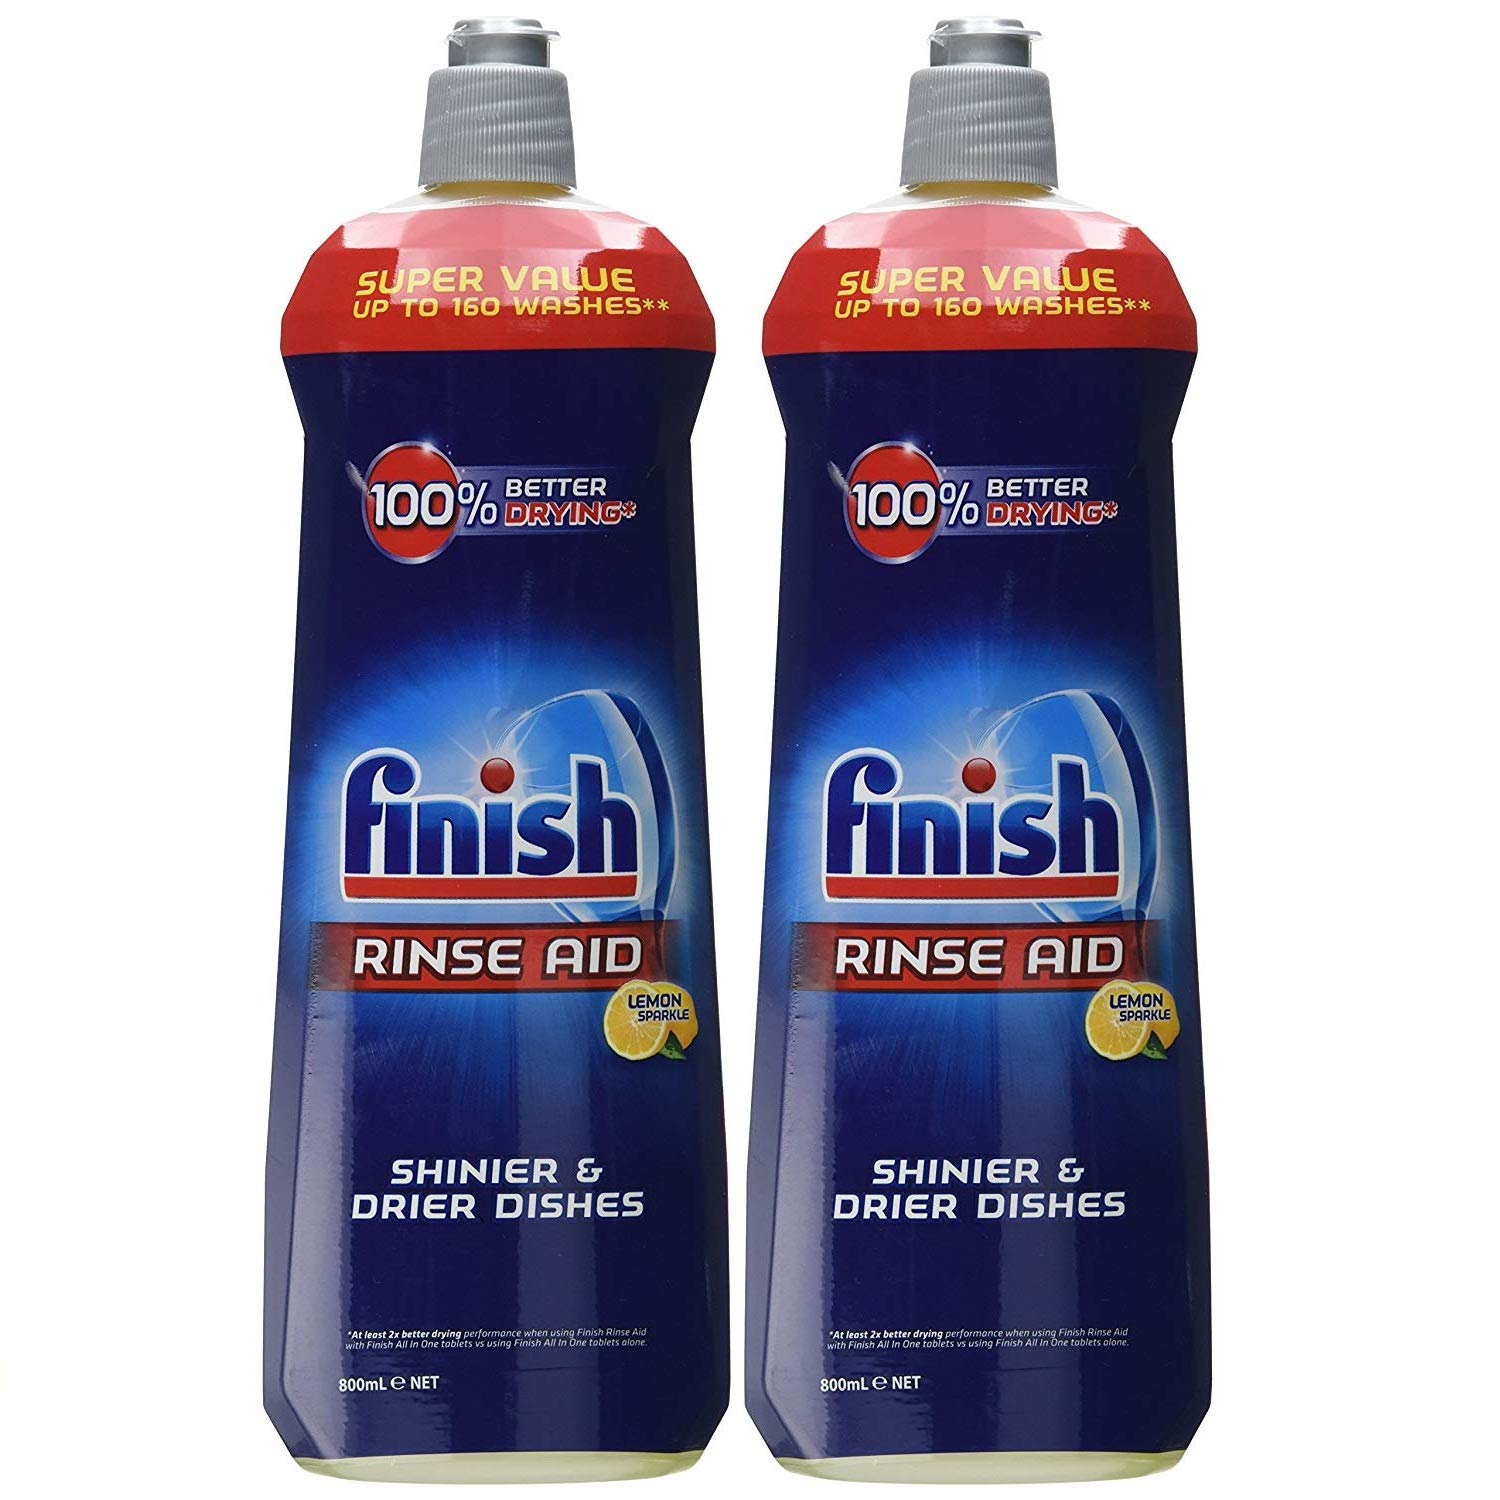 Finish Rinse Aid - 800ml - Pack of 2